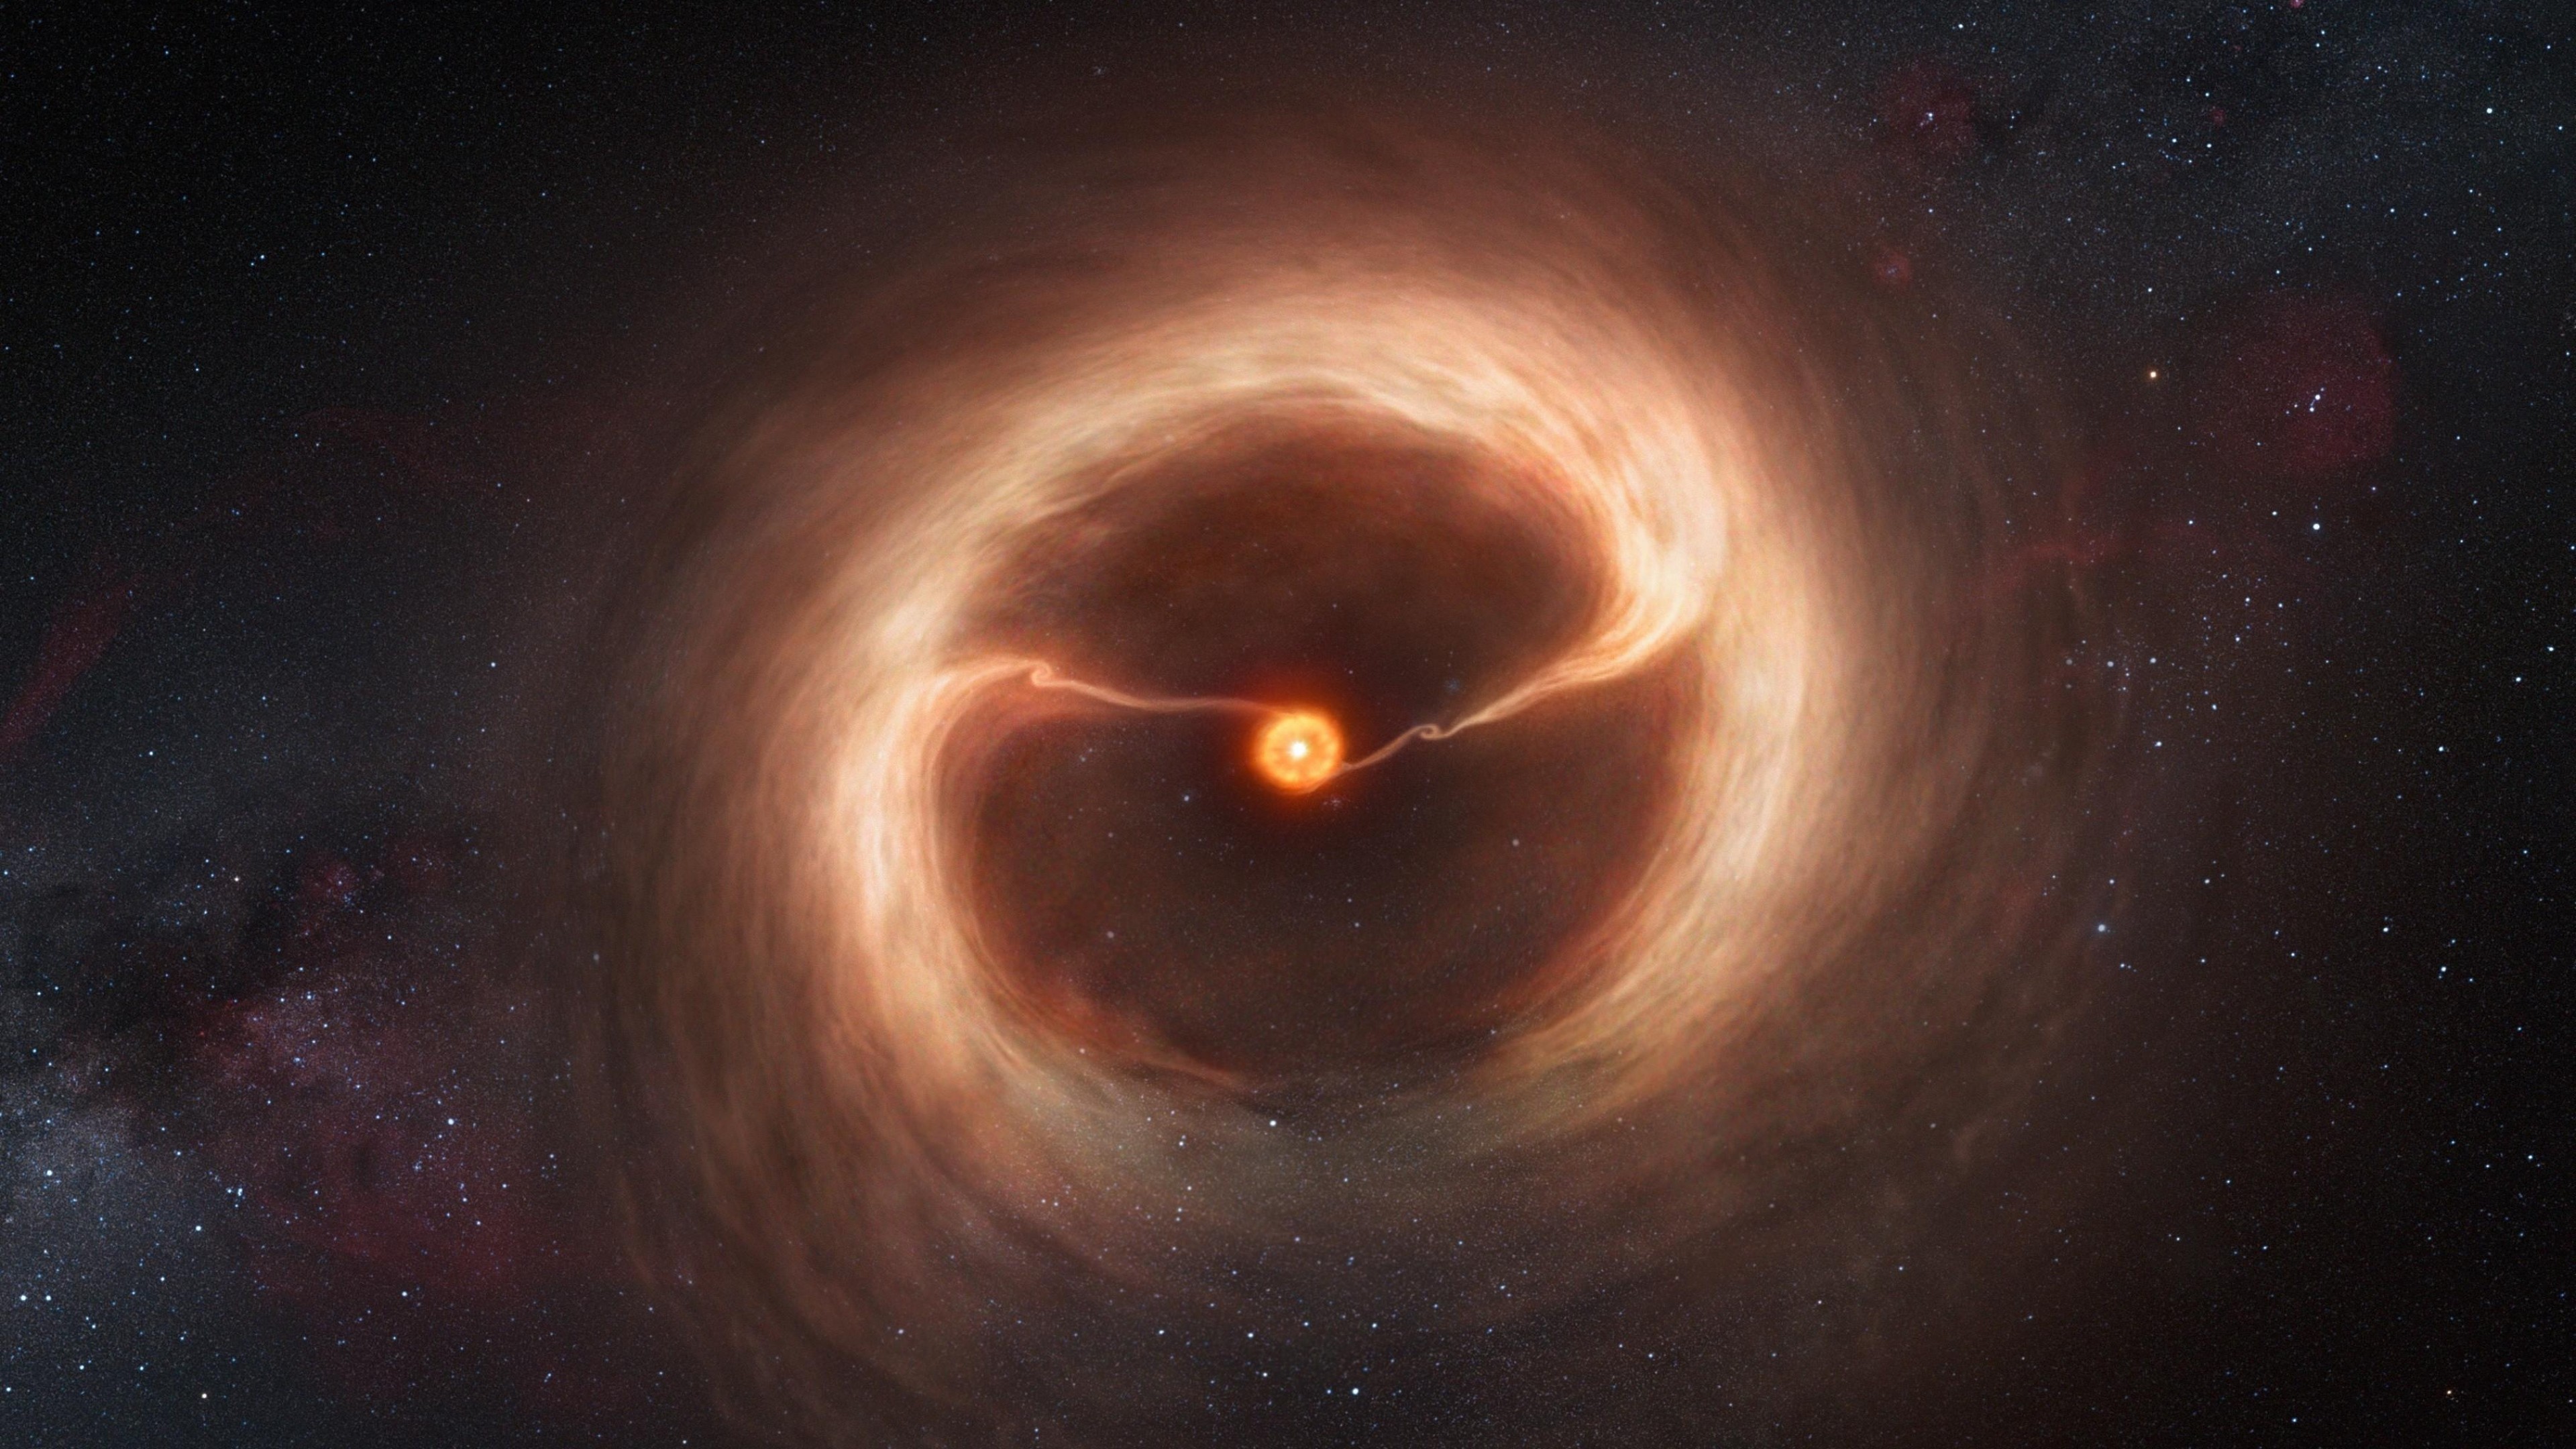 3840x2160 wallpaper.wiki-HD-Black-Hole-Images-PIC-WPD0011652. by Billion Photos